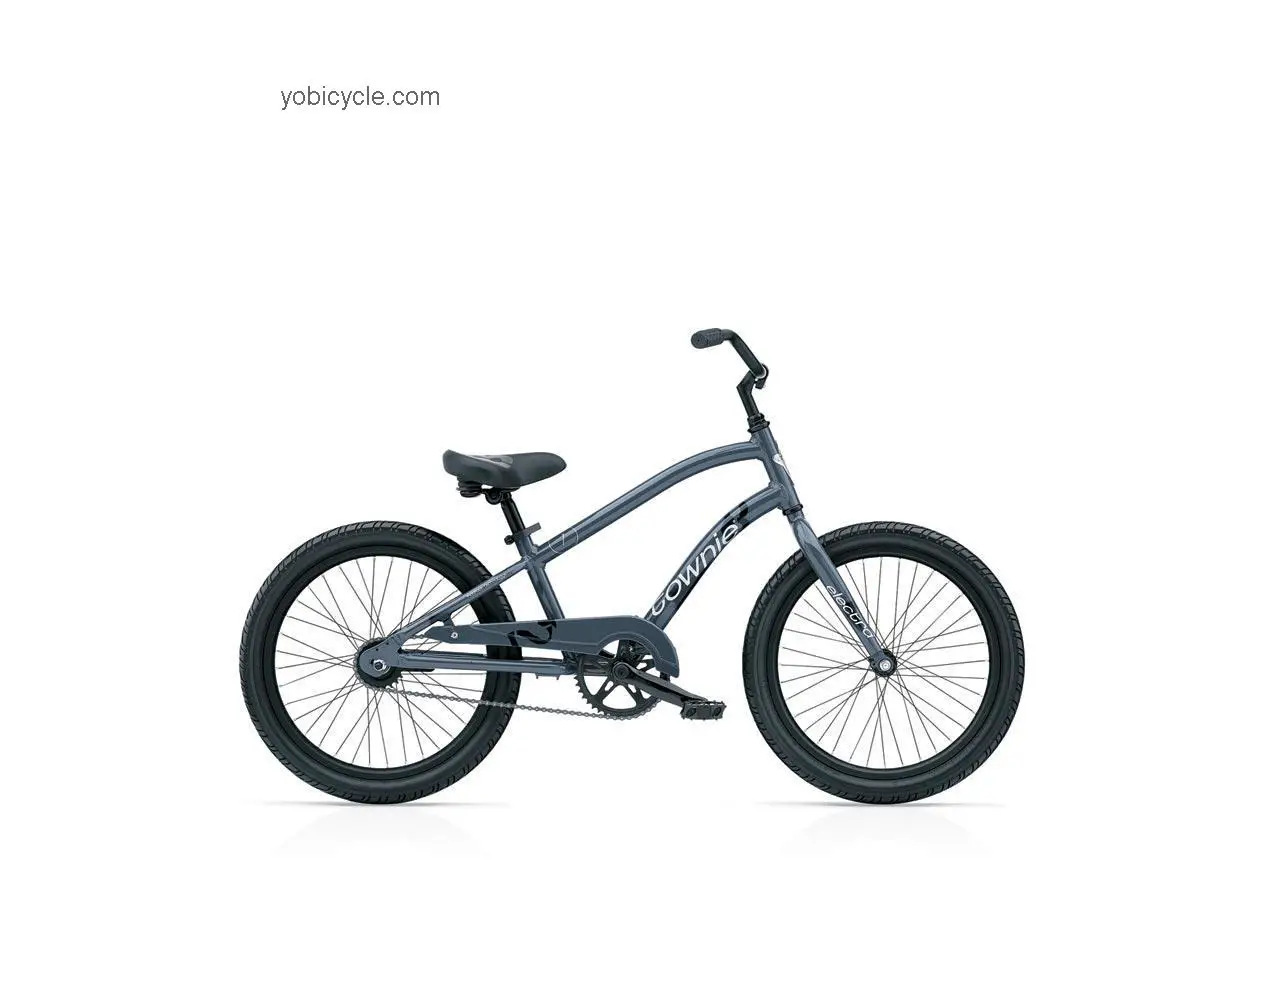 Electra Townie 1 Boys 2009 comparison online with competitors